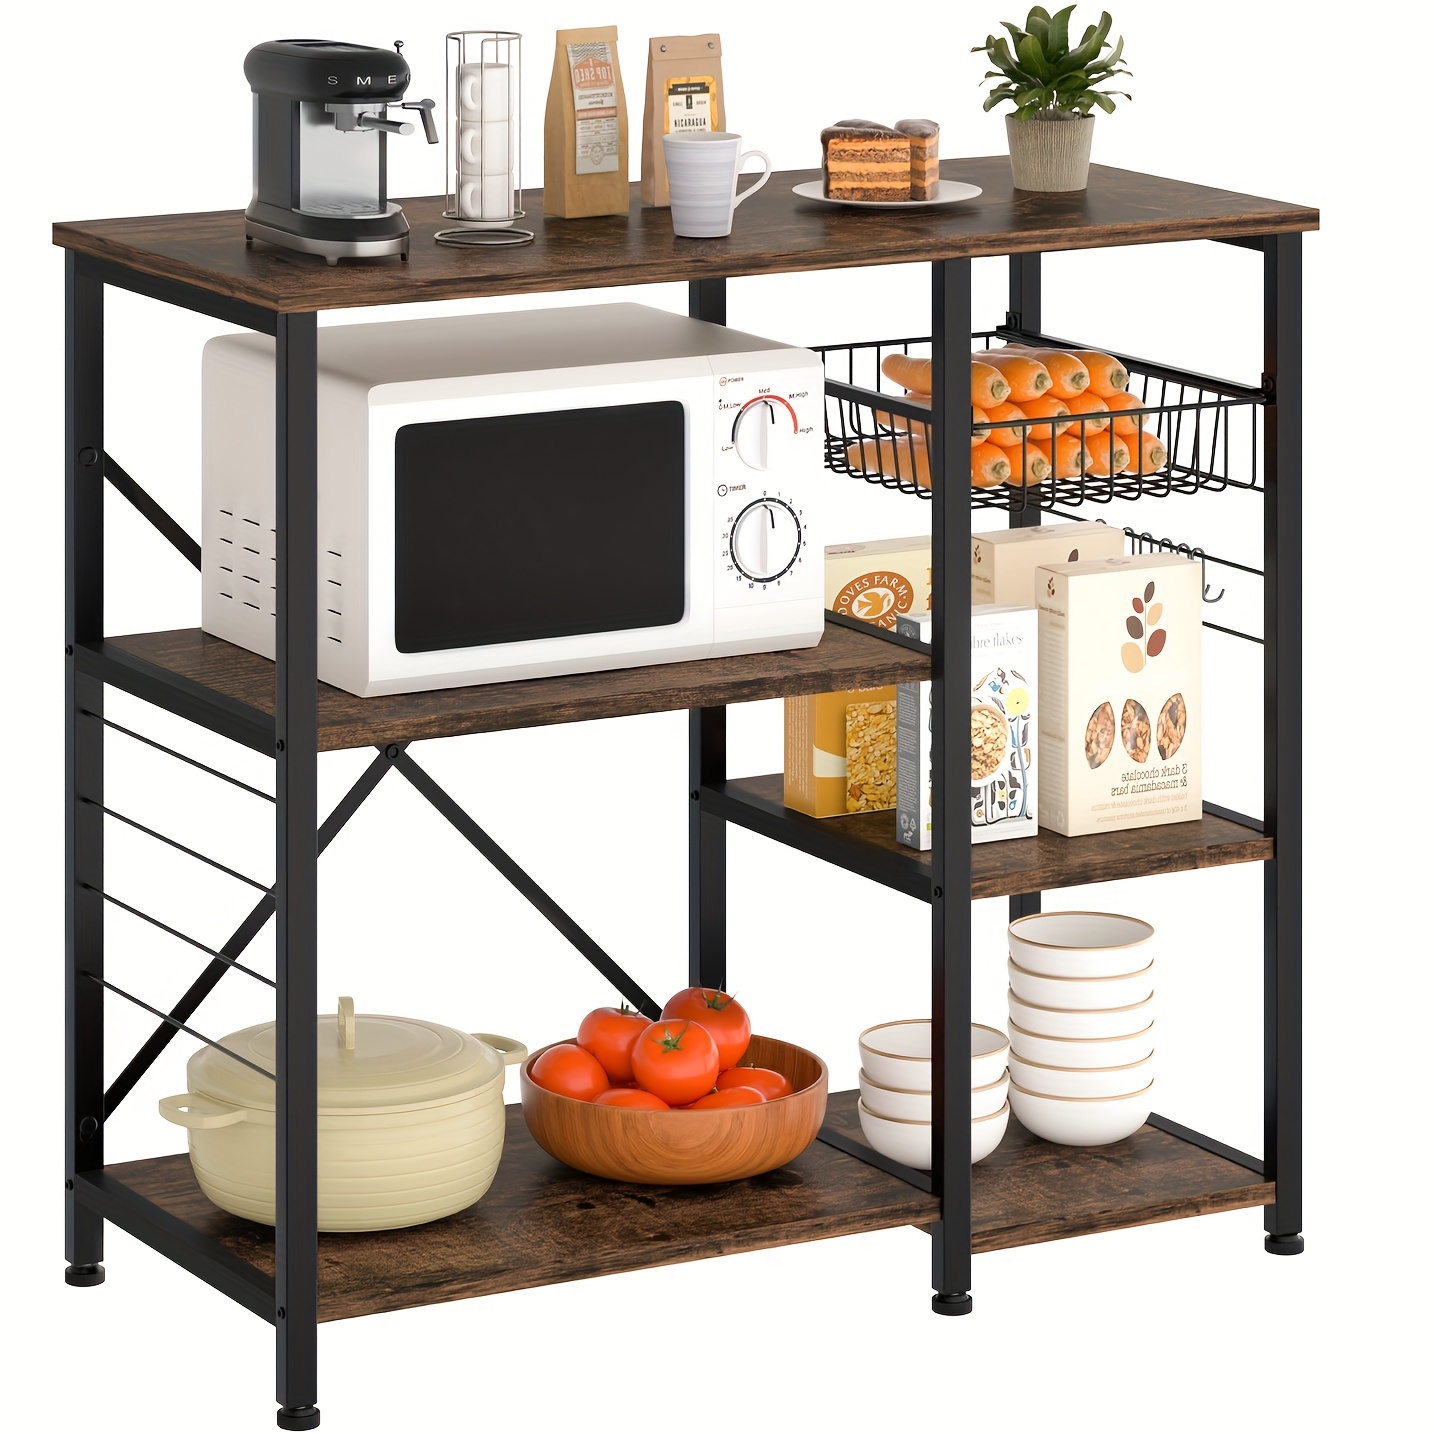 

Sunlei Kitchen Bakers Rack, Microwave Stand, Coffee Bar With Wire Basket, 5 Tier Kitchen Oven Stand, Kitchen Storage Shelf With 6 S-hooks, For Living Room, Spice, Pots And Pans Organizer